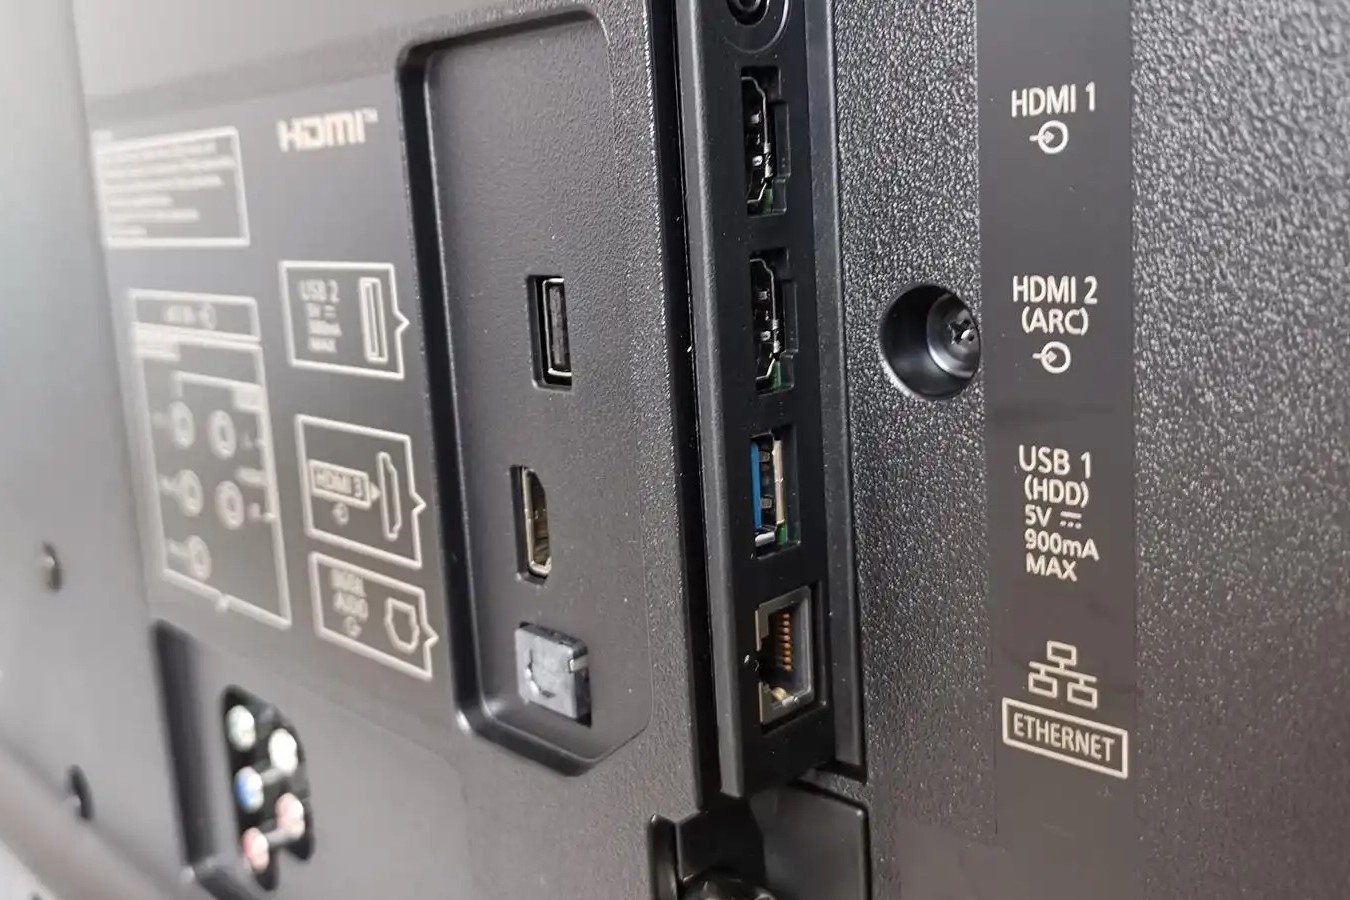 Which HDMI Port Do I Connect Oculus Rift To